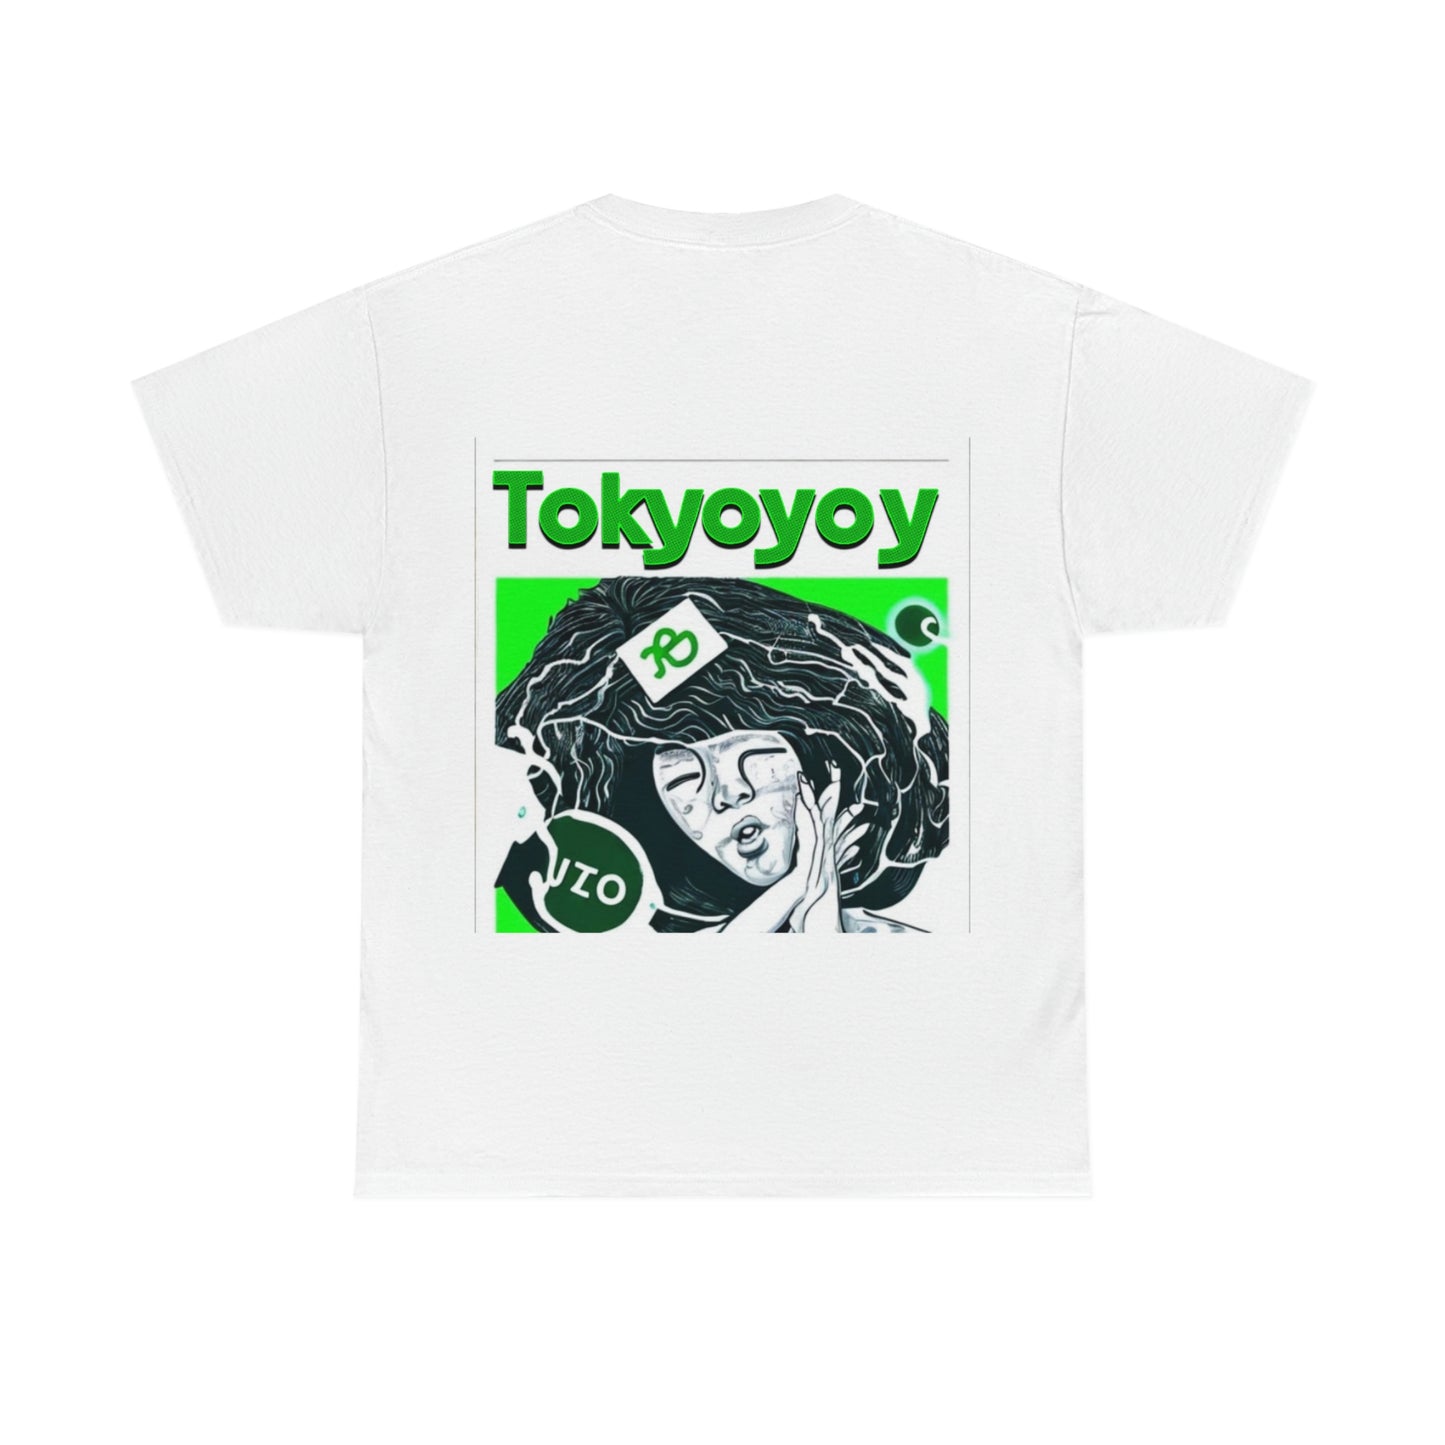 Copy of Tolerate - Indigenous Dystopian Warrior  T-Shirt Collection